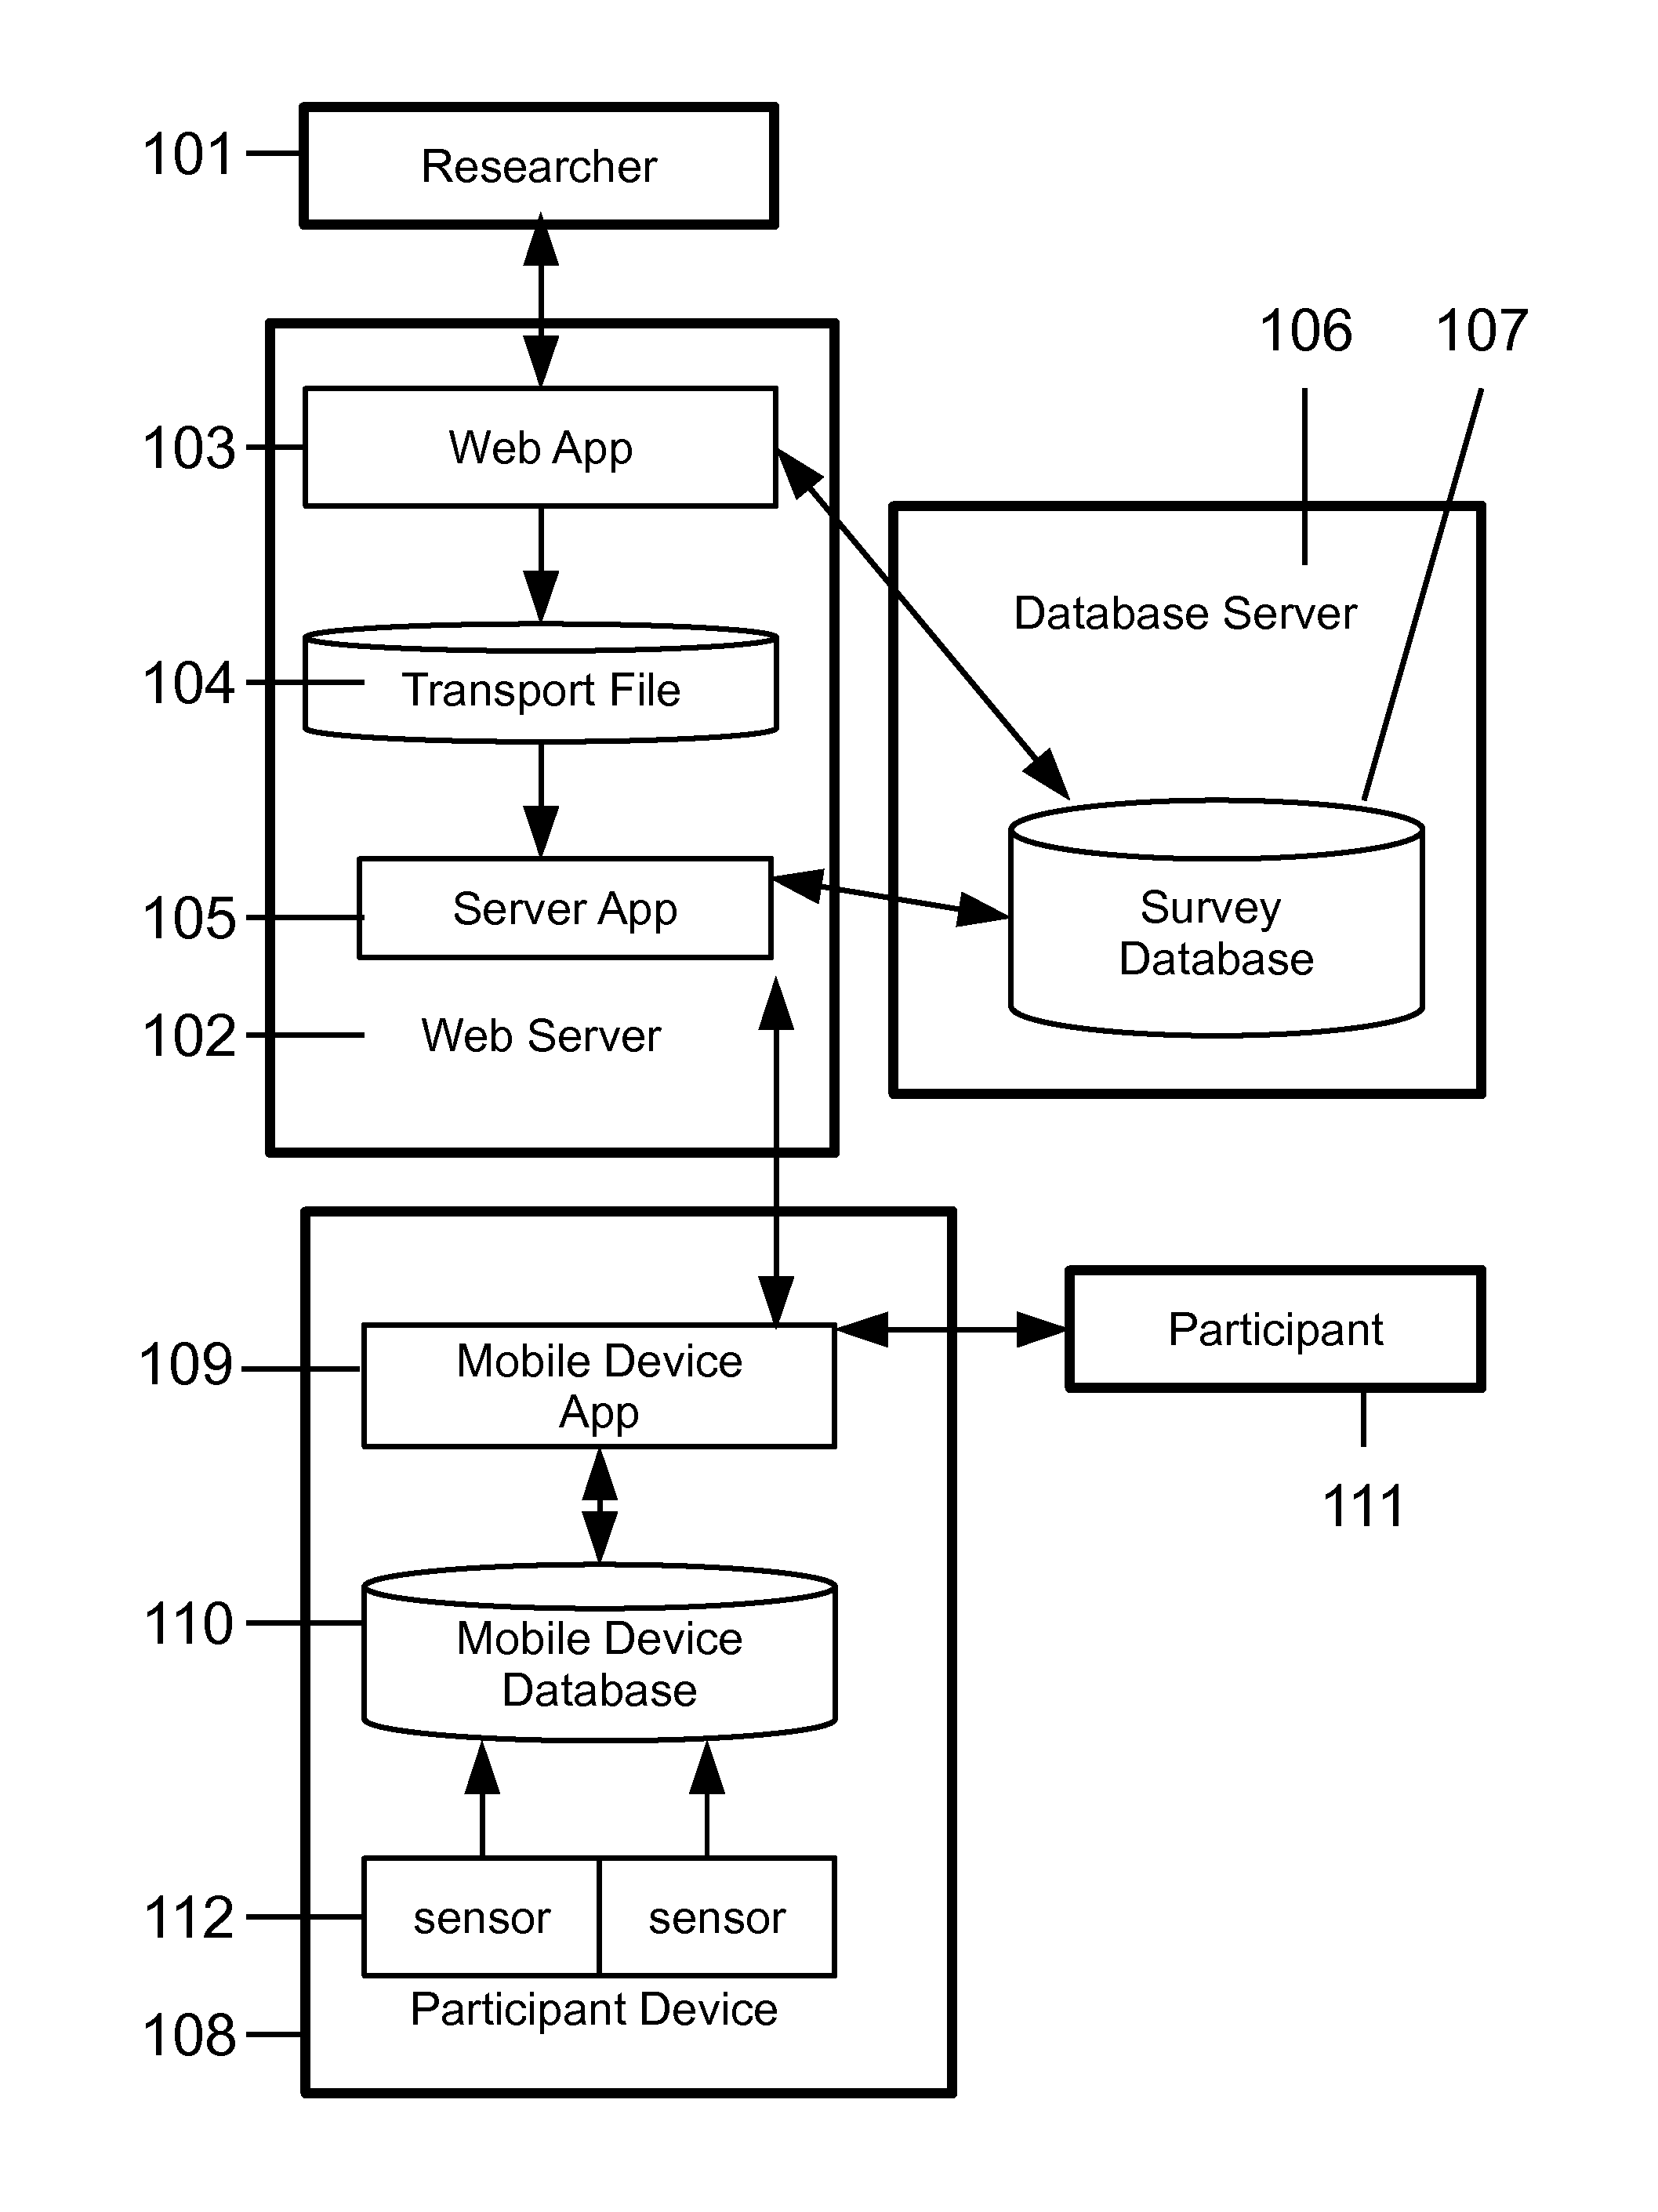 System to dynamically collect and synchronize data with mobile devices